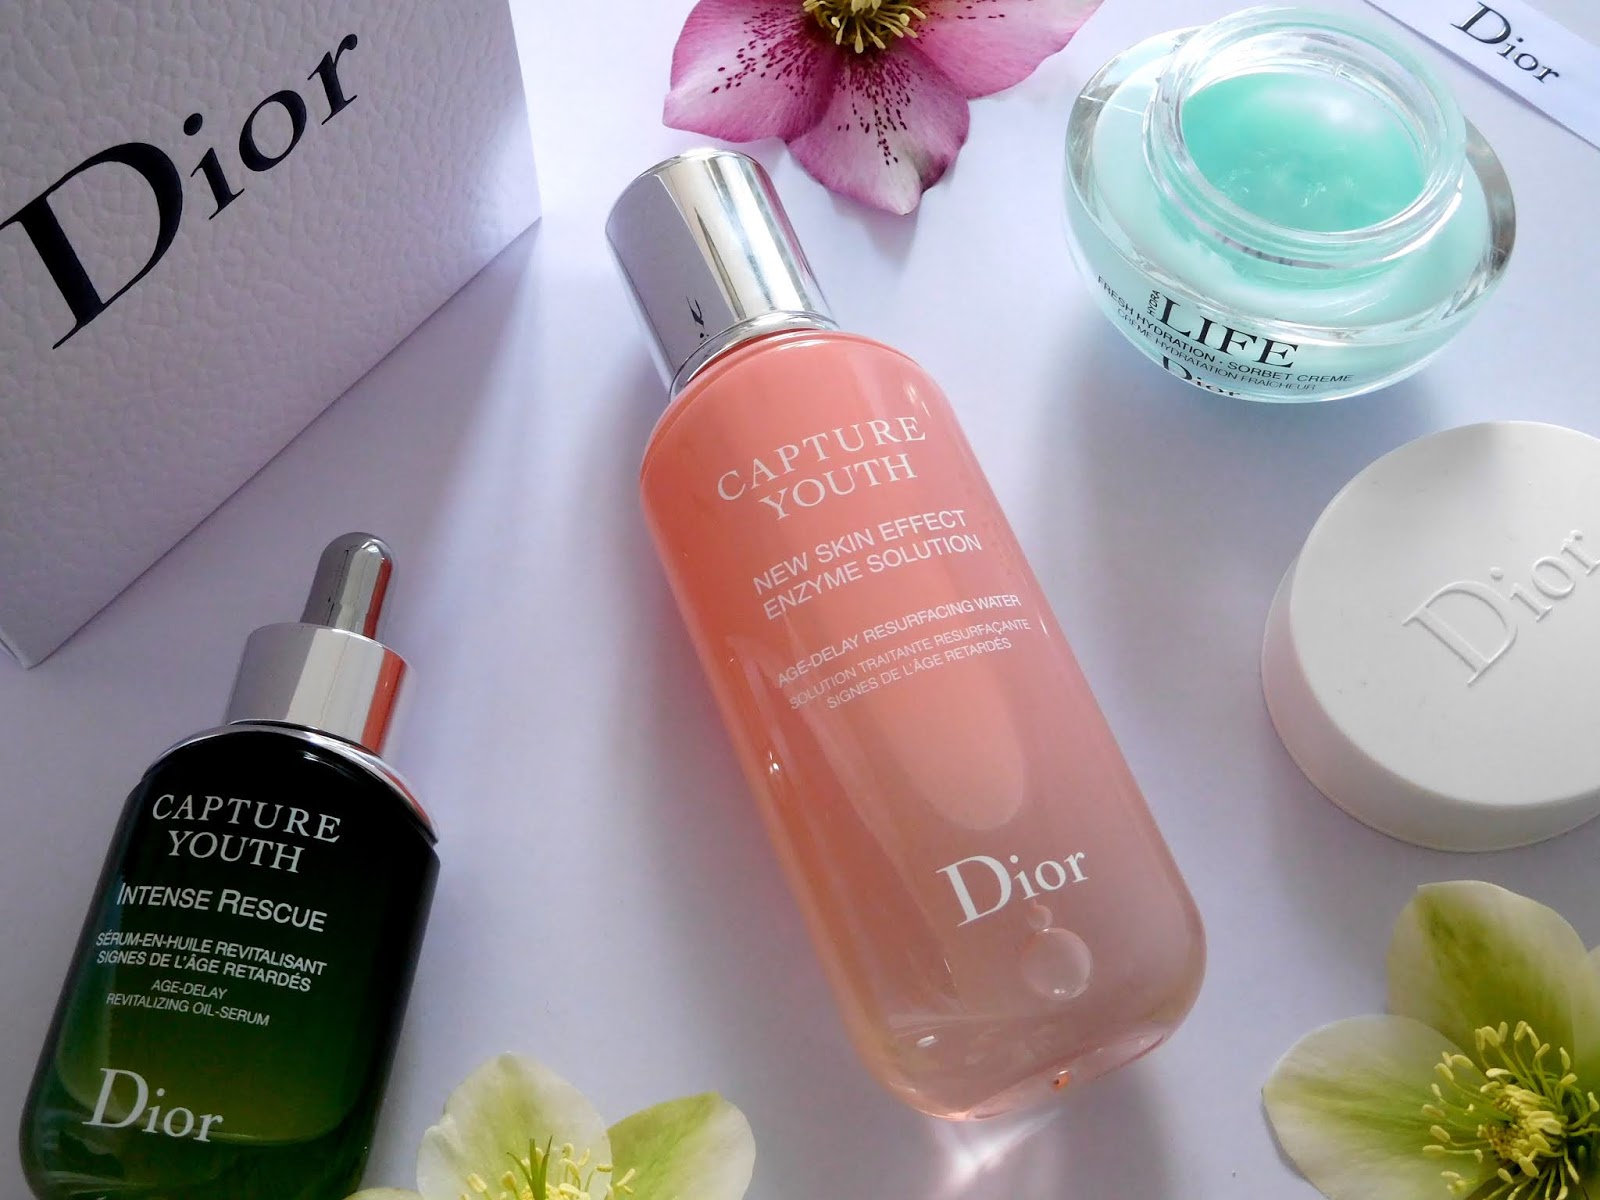 dior capture youth cream review